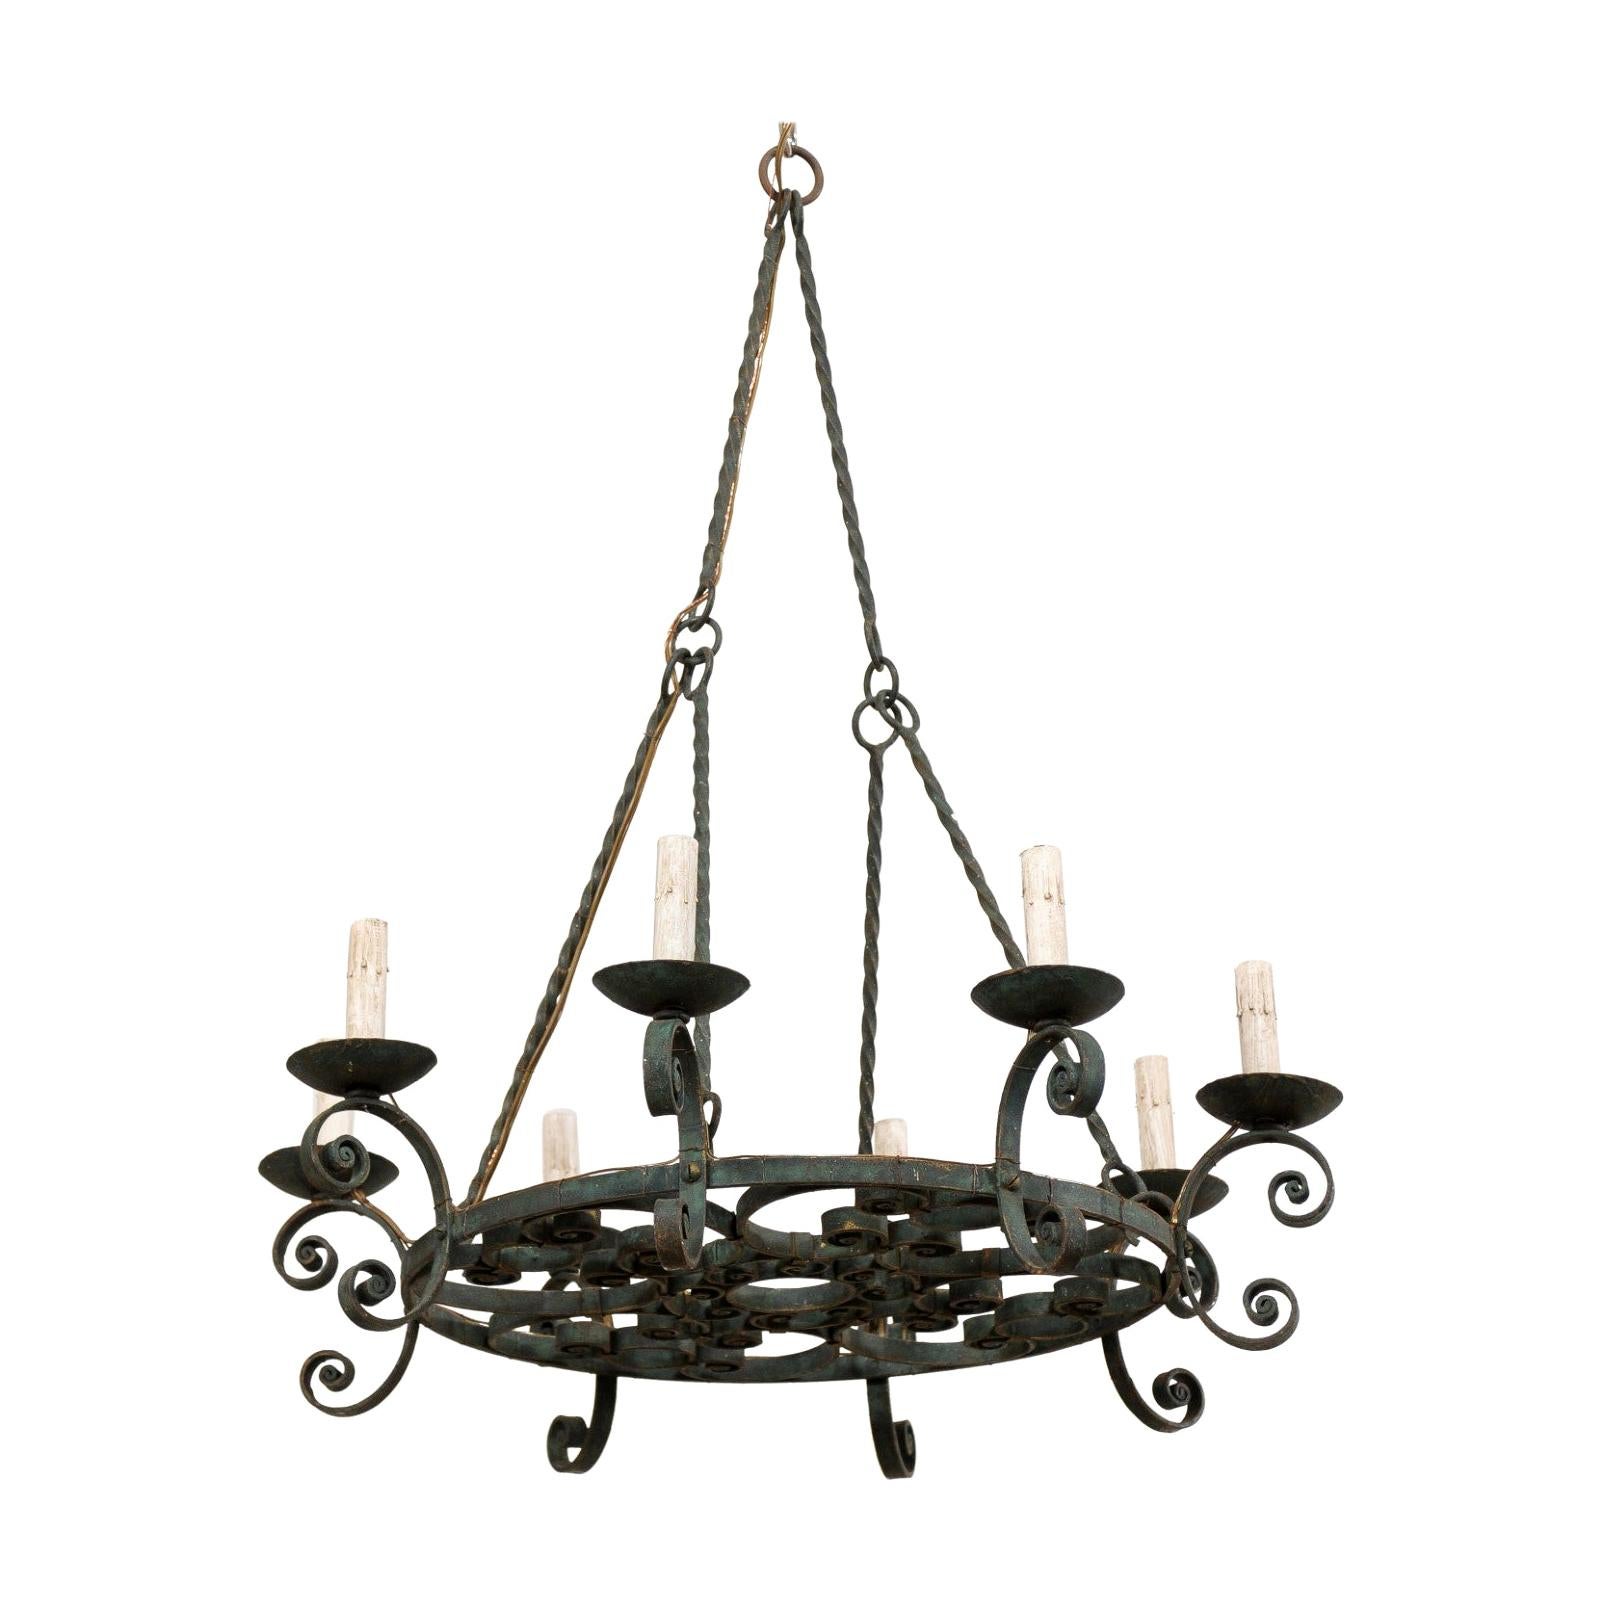 Mid-20th Century French Round Scrolled Iron Chandelier with Lovely Patina